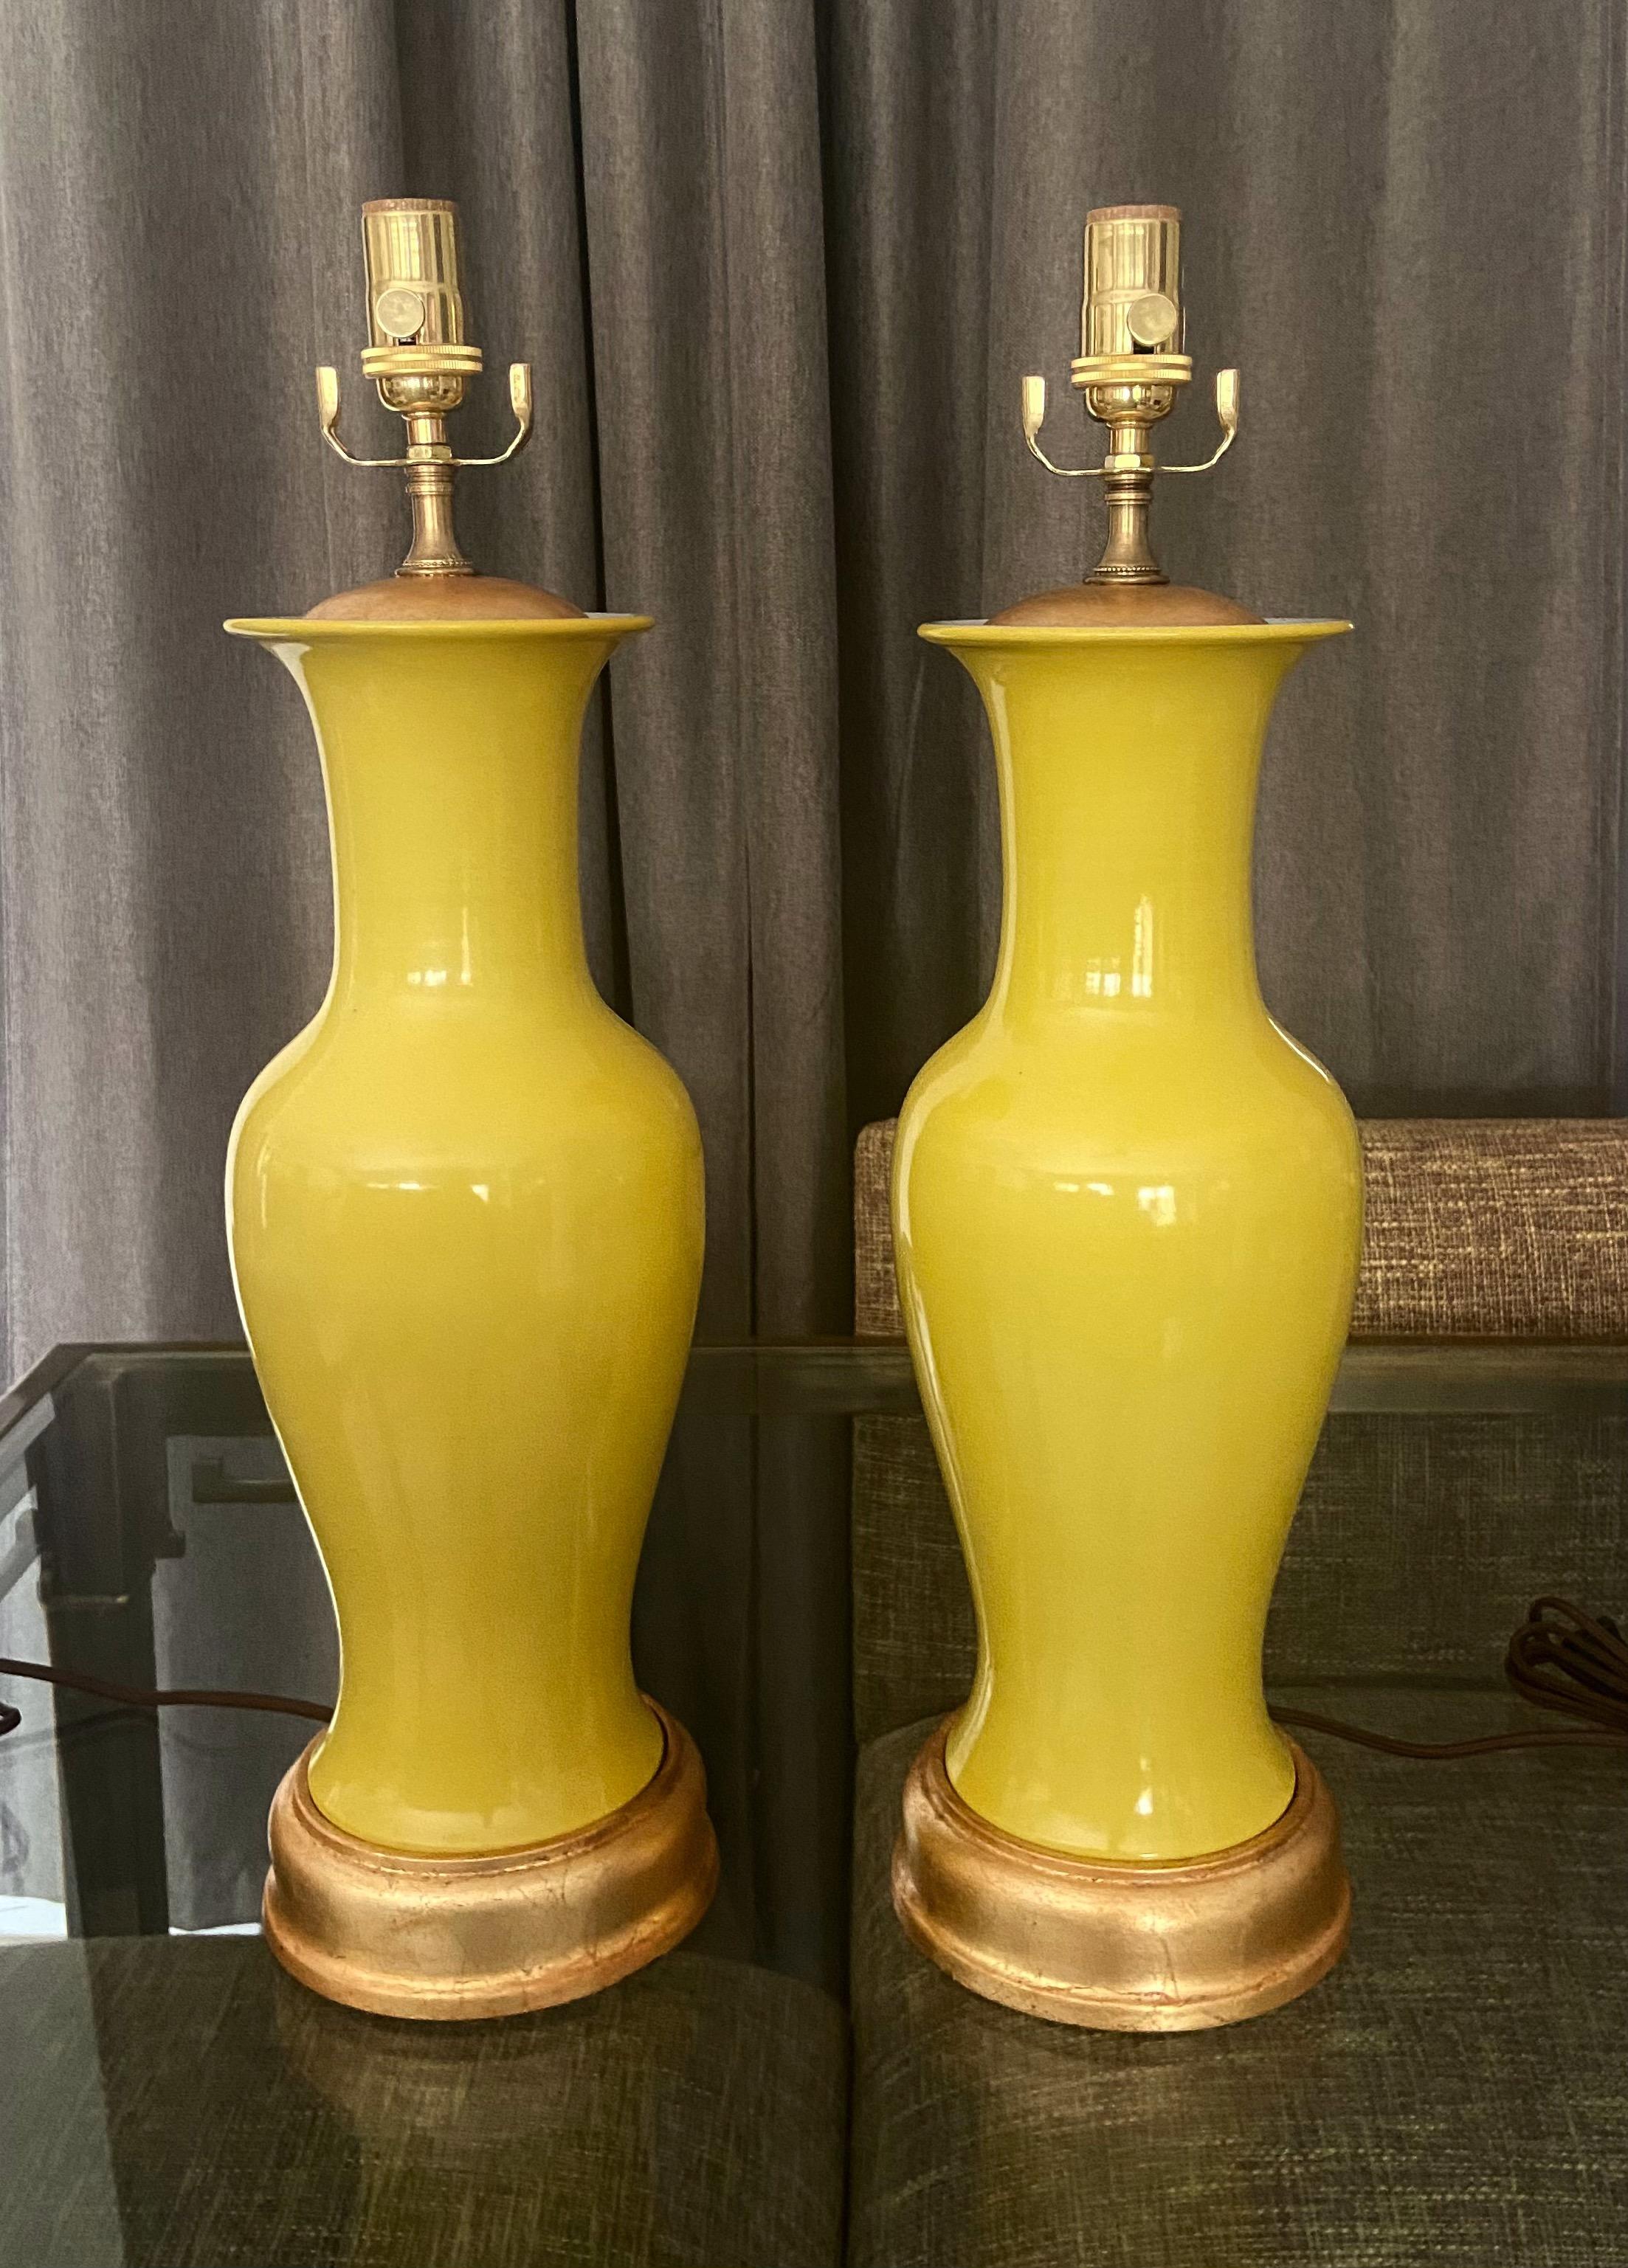 Pair of Asia yellow colored porcelain baluster form shaped vases mounted on gilt turned wood lamp bases. Newly wired with new brass 3 way socket and rayon cords. Vase portion is 16